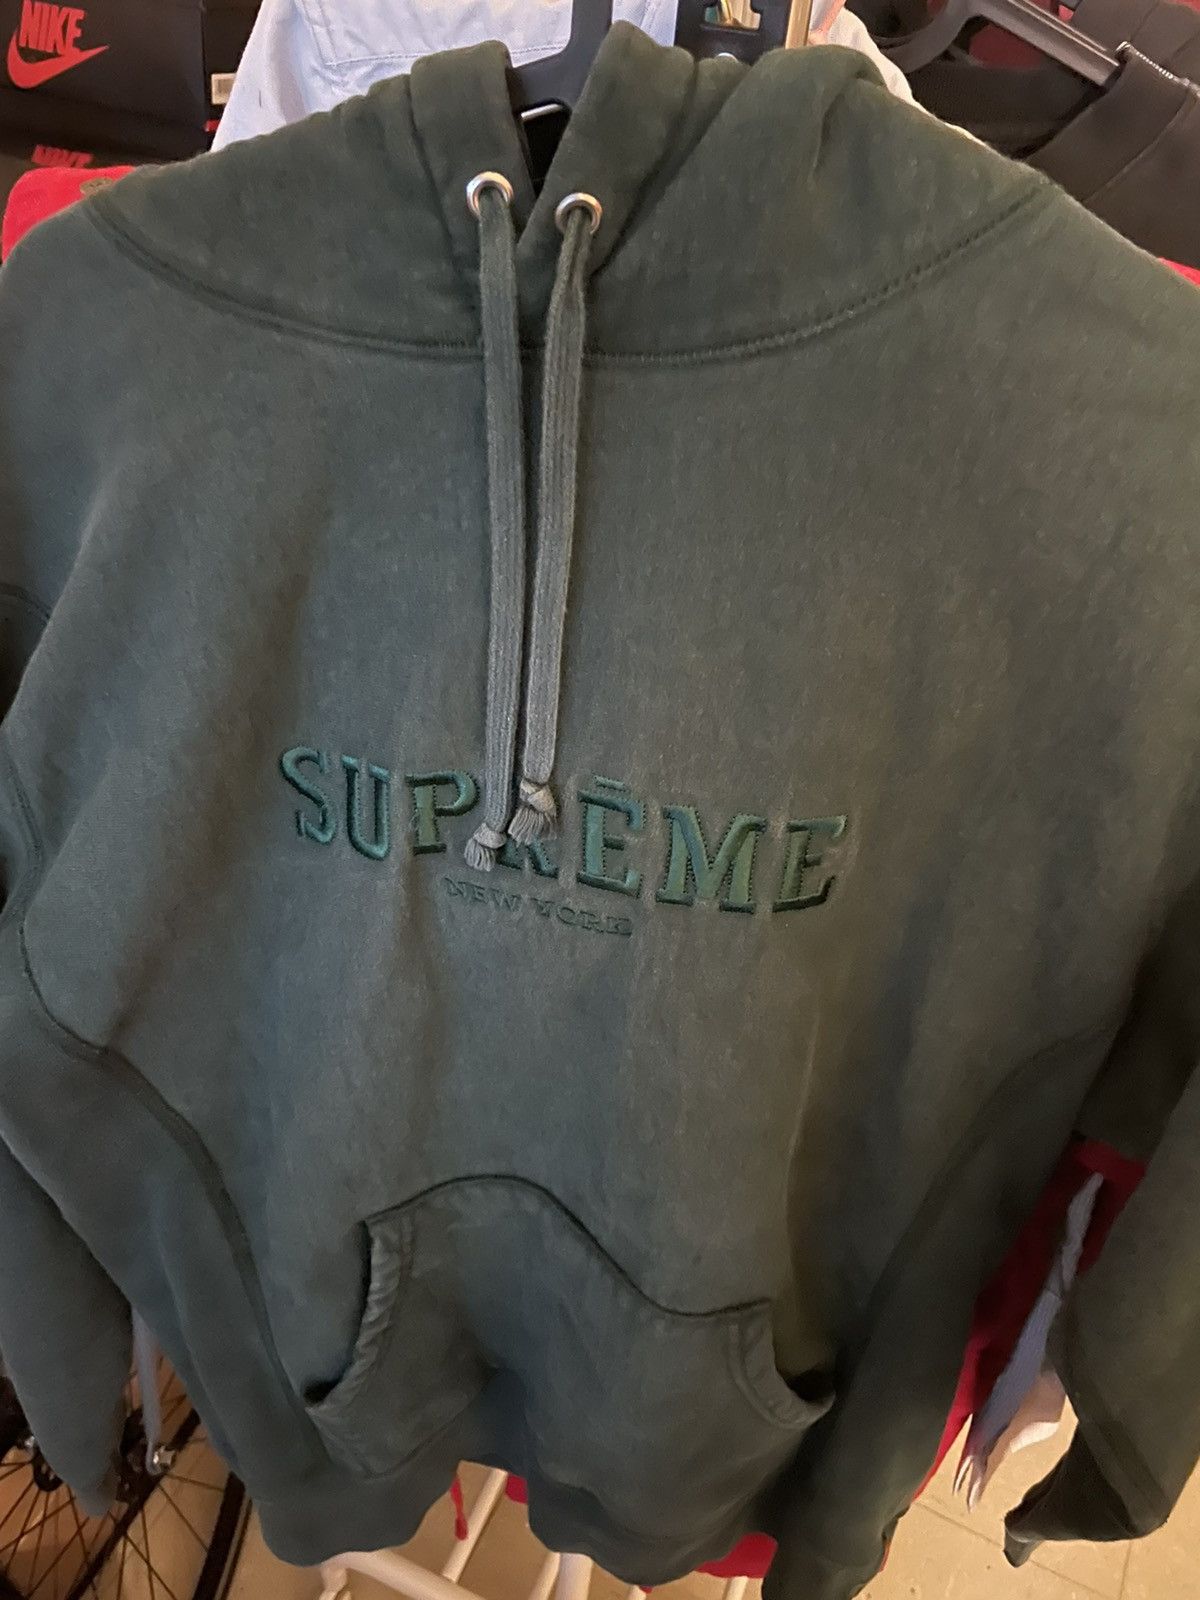 Supreme Supreme Atelier Pullover FW 2012 Forest Green Hoody sz M | Grailed